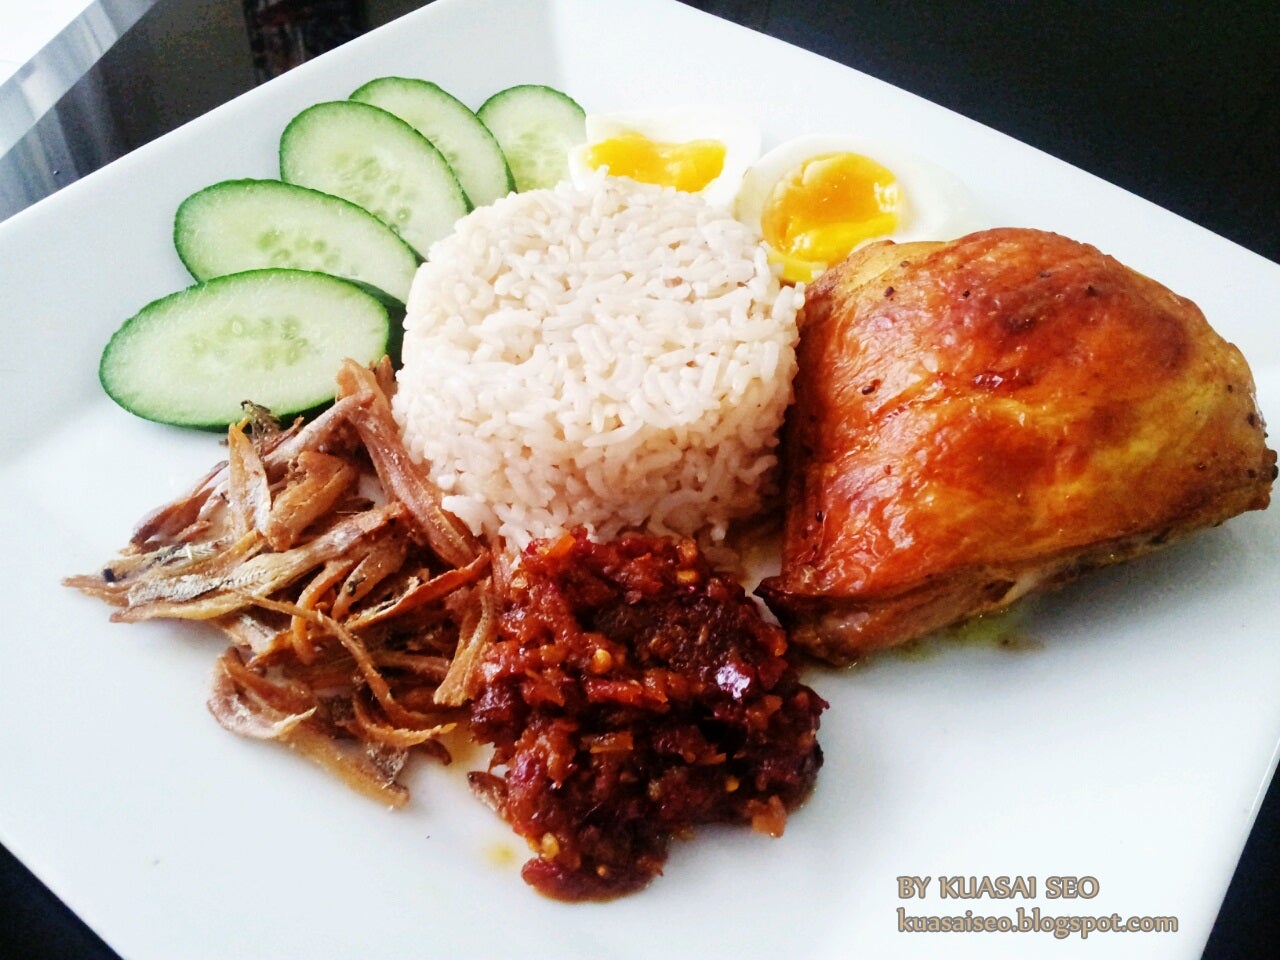 Did You Know That Nasi Lemak Used to Be Farmers' Breakfast Meal? - WORLD OF BUZZ